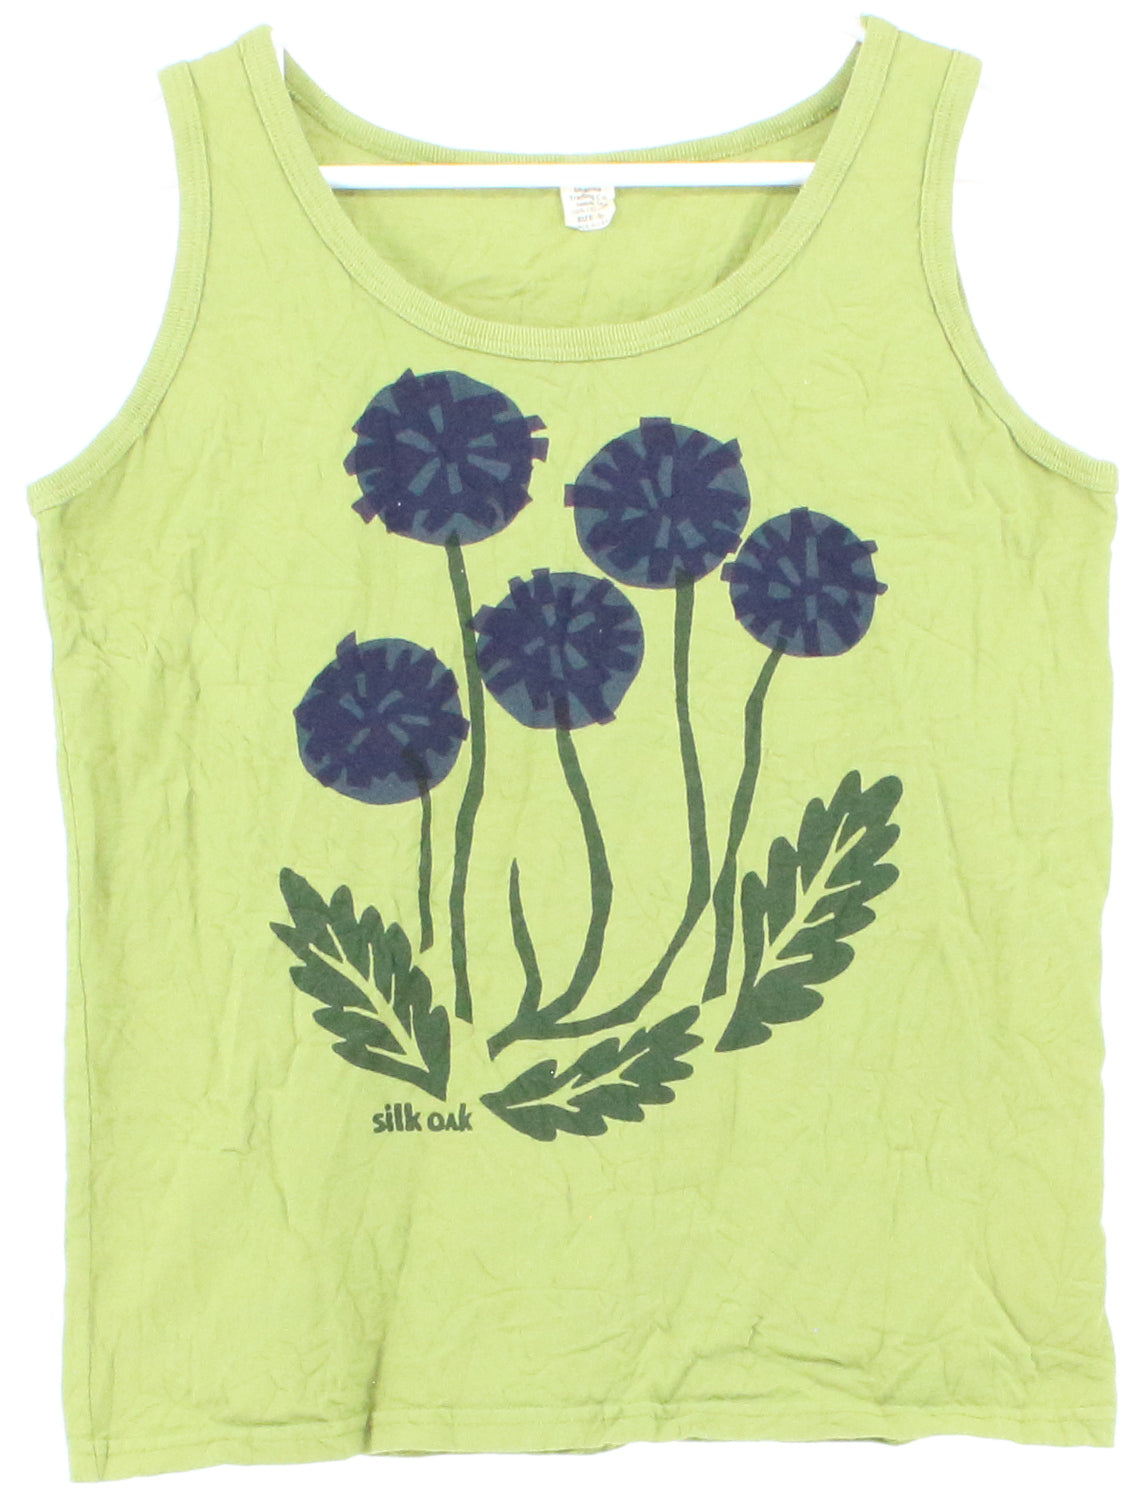 Dharma Trading Co. Green Graphic Tank Top